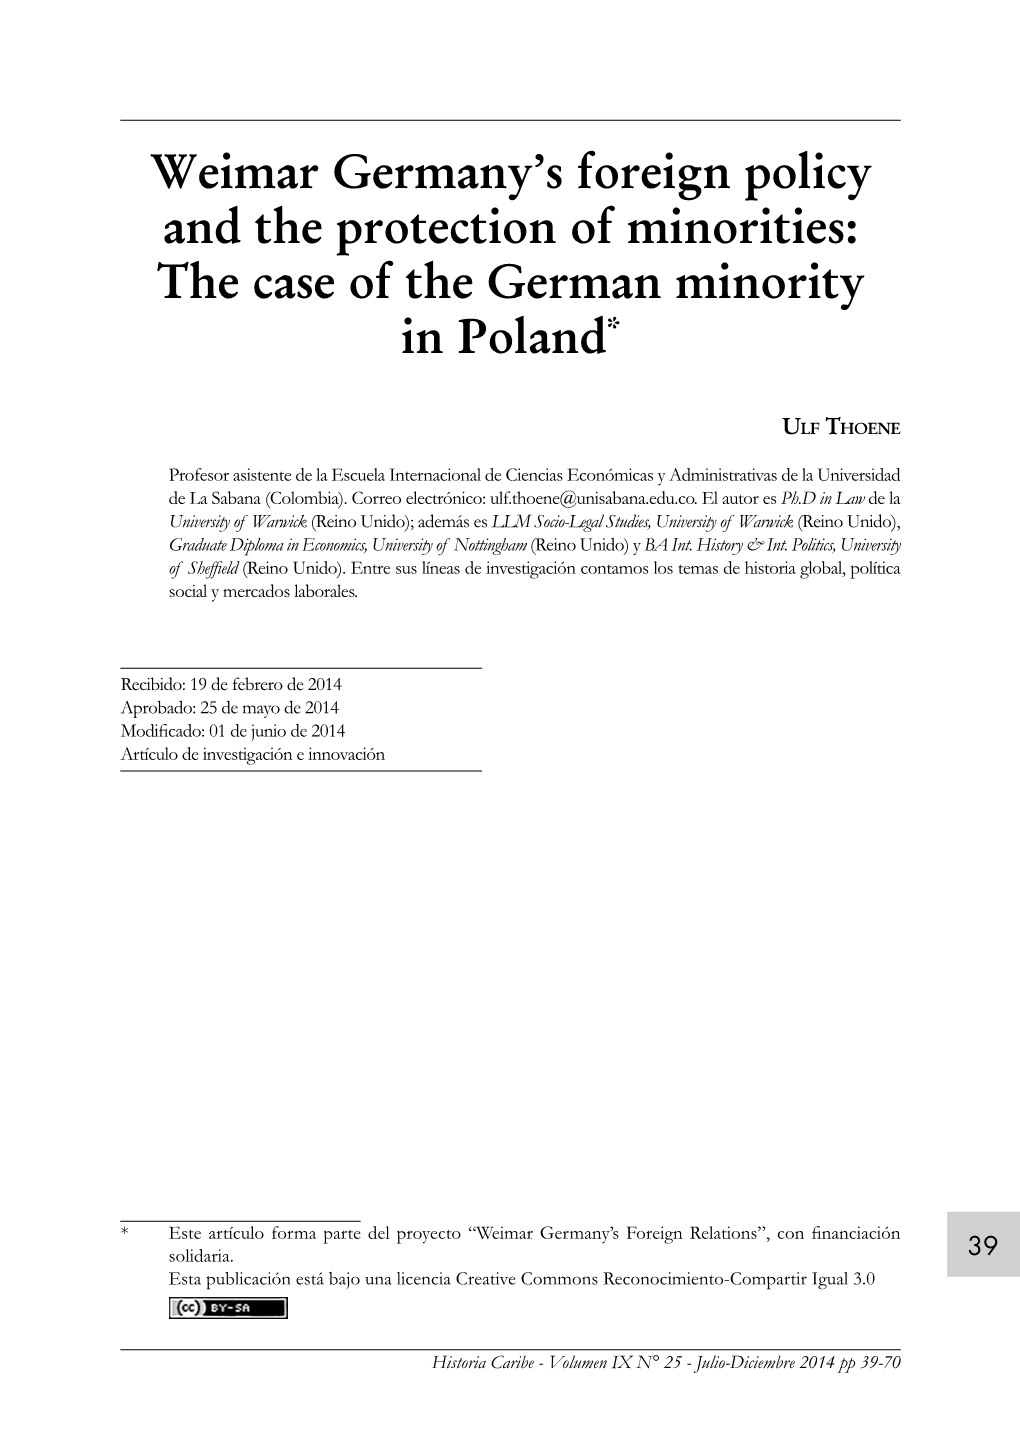 Weimar Germany's Foreign Policy and the Protection of Minorities